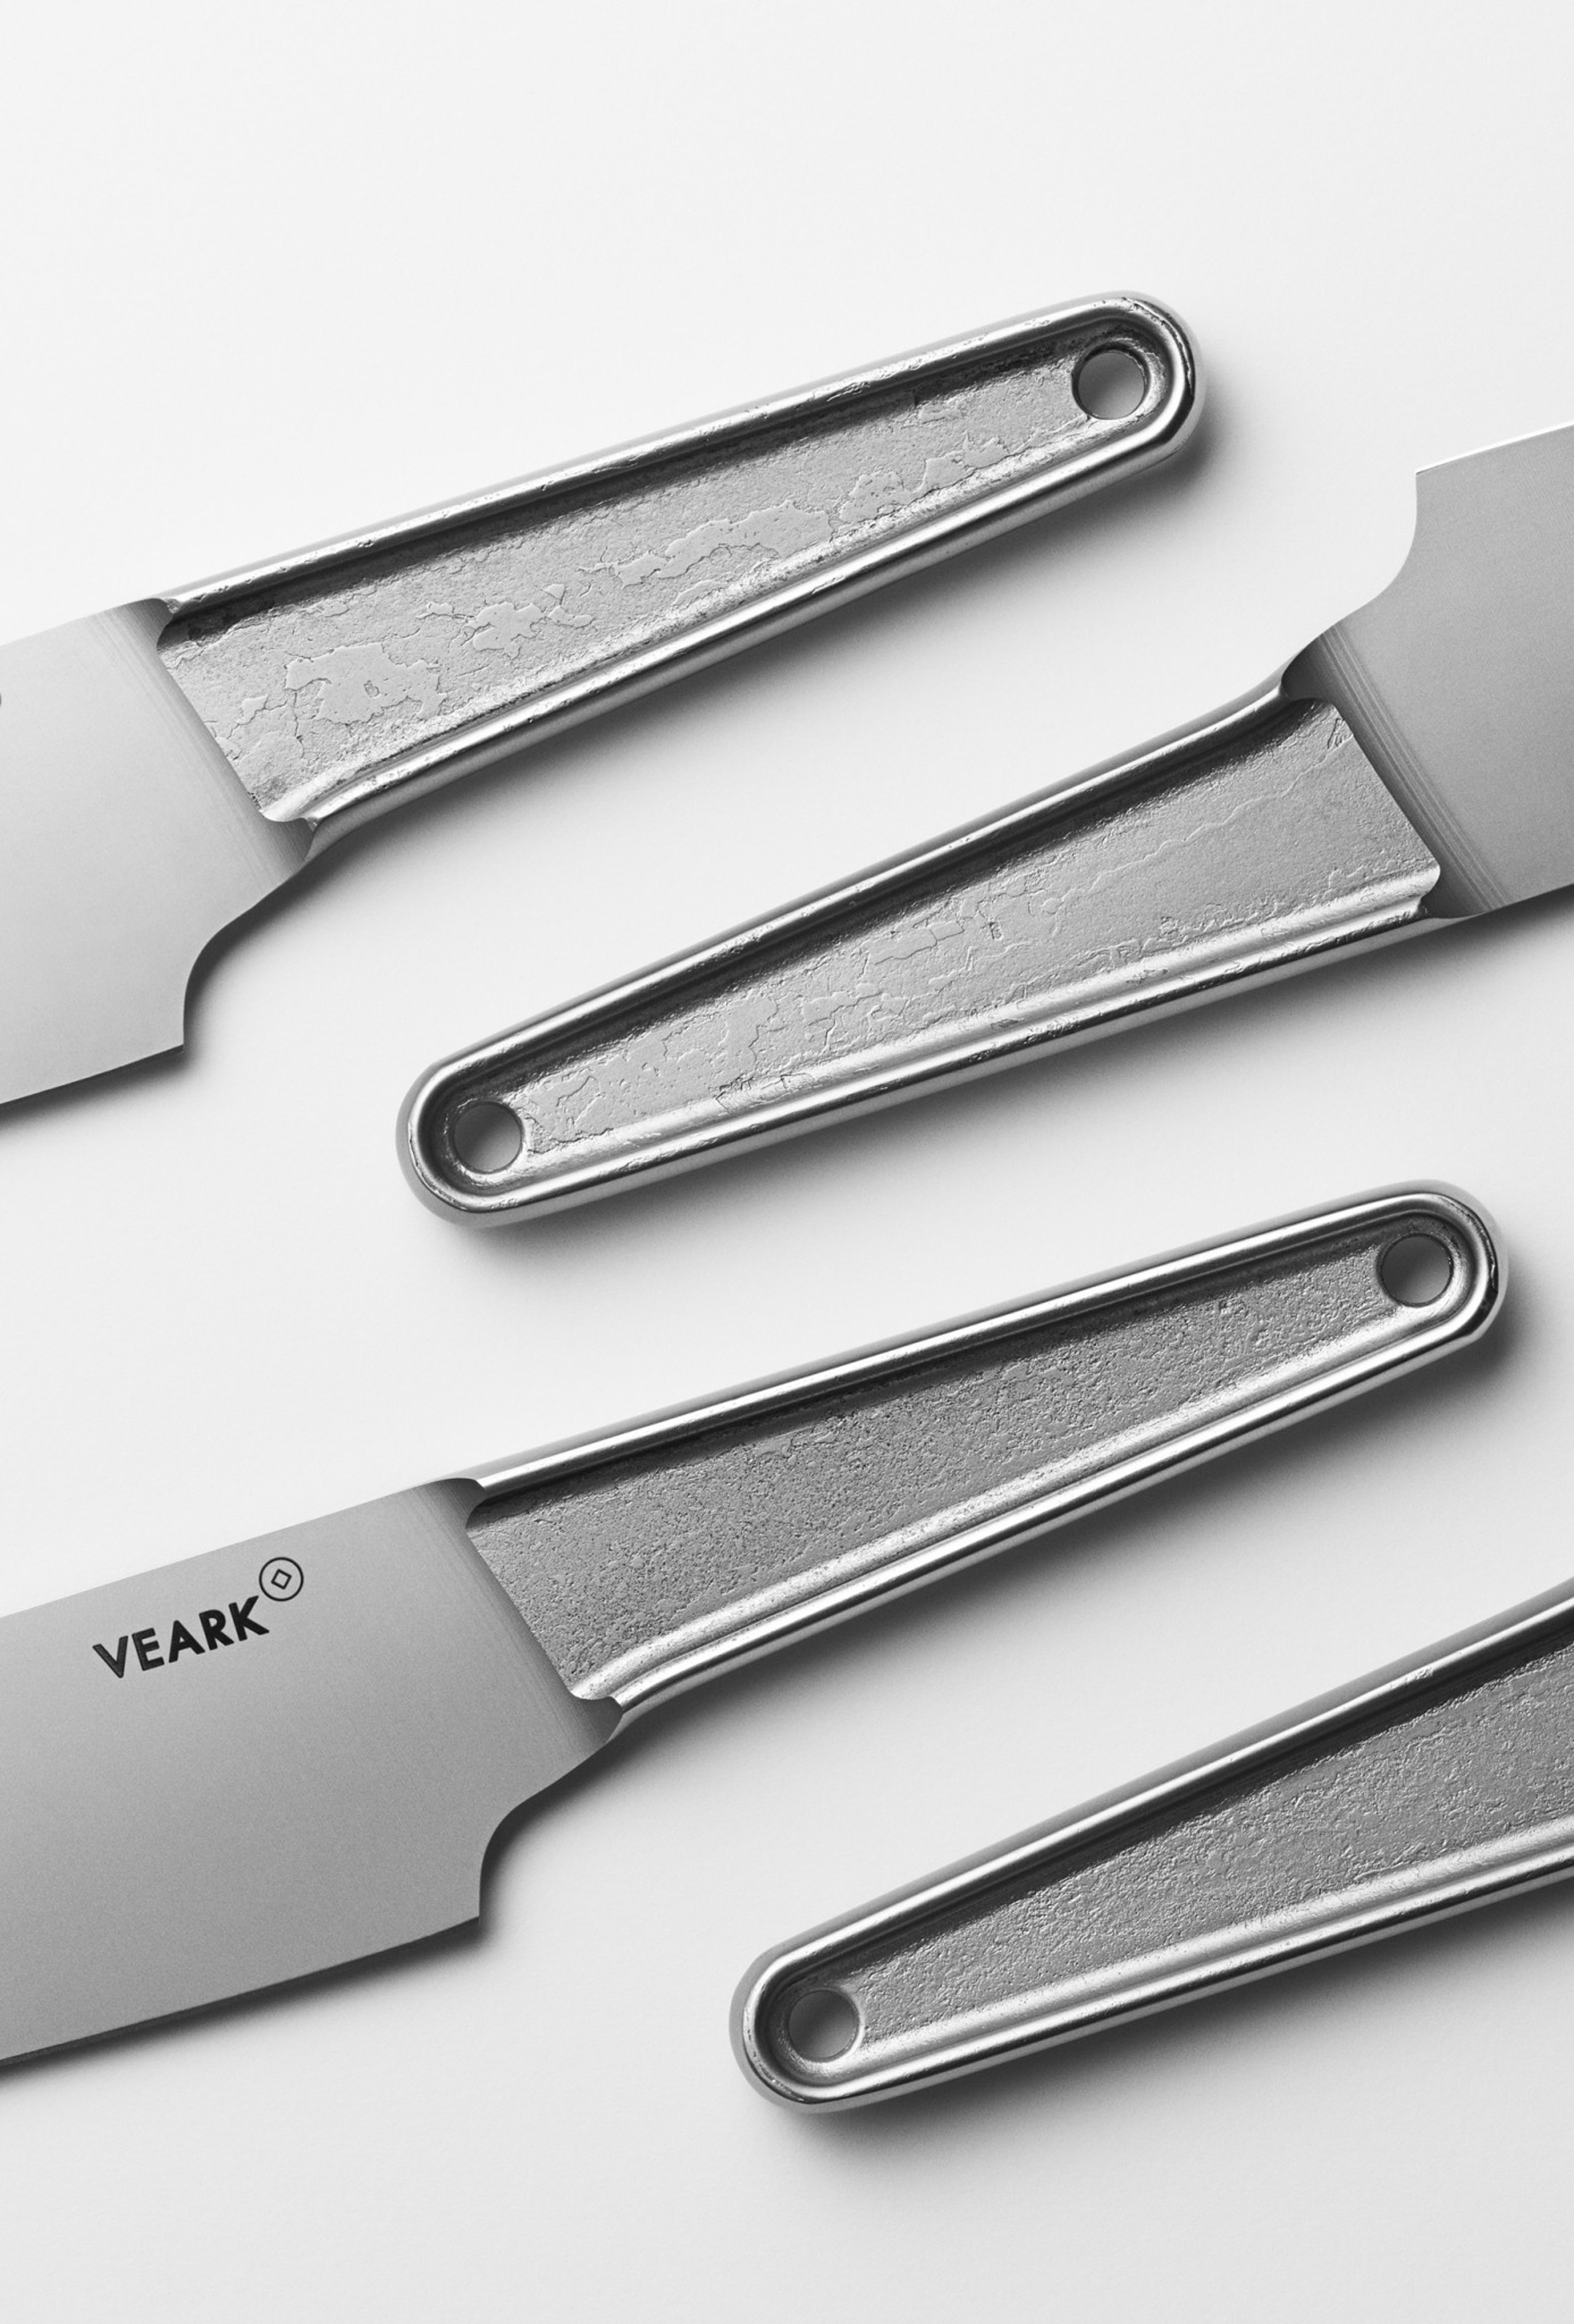 CK01 knife by Veark